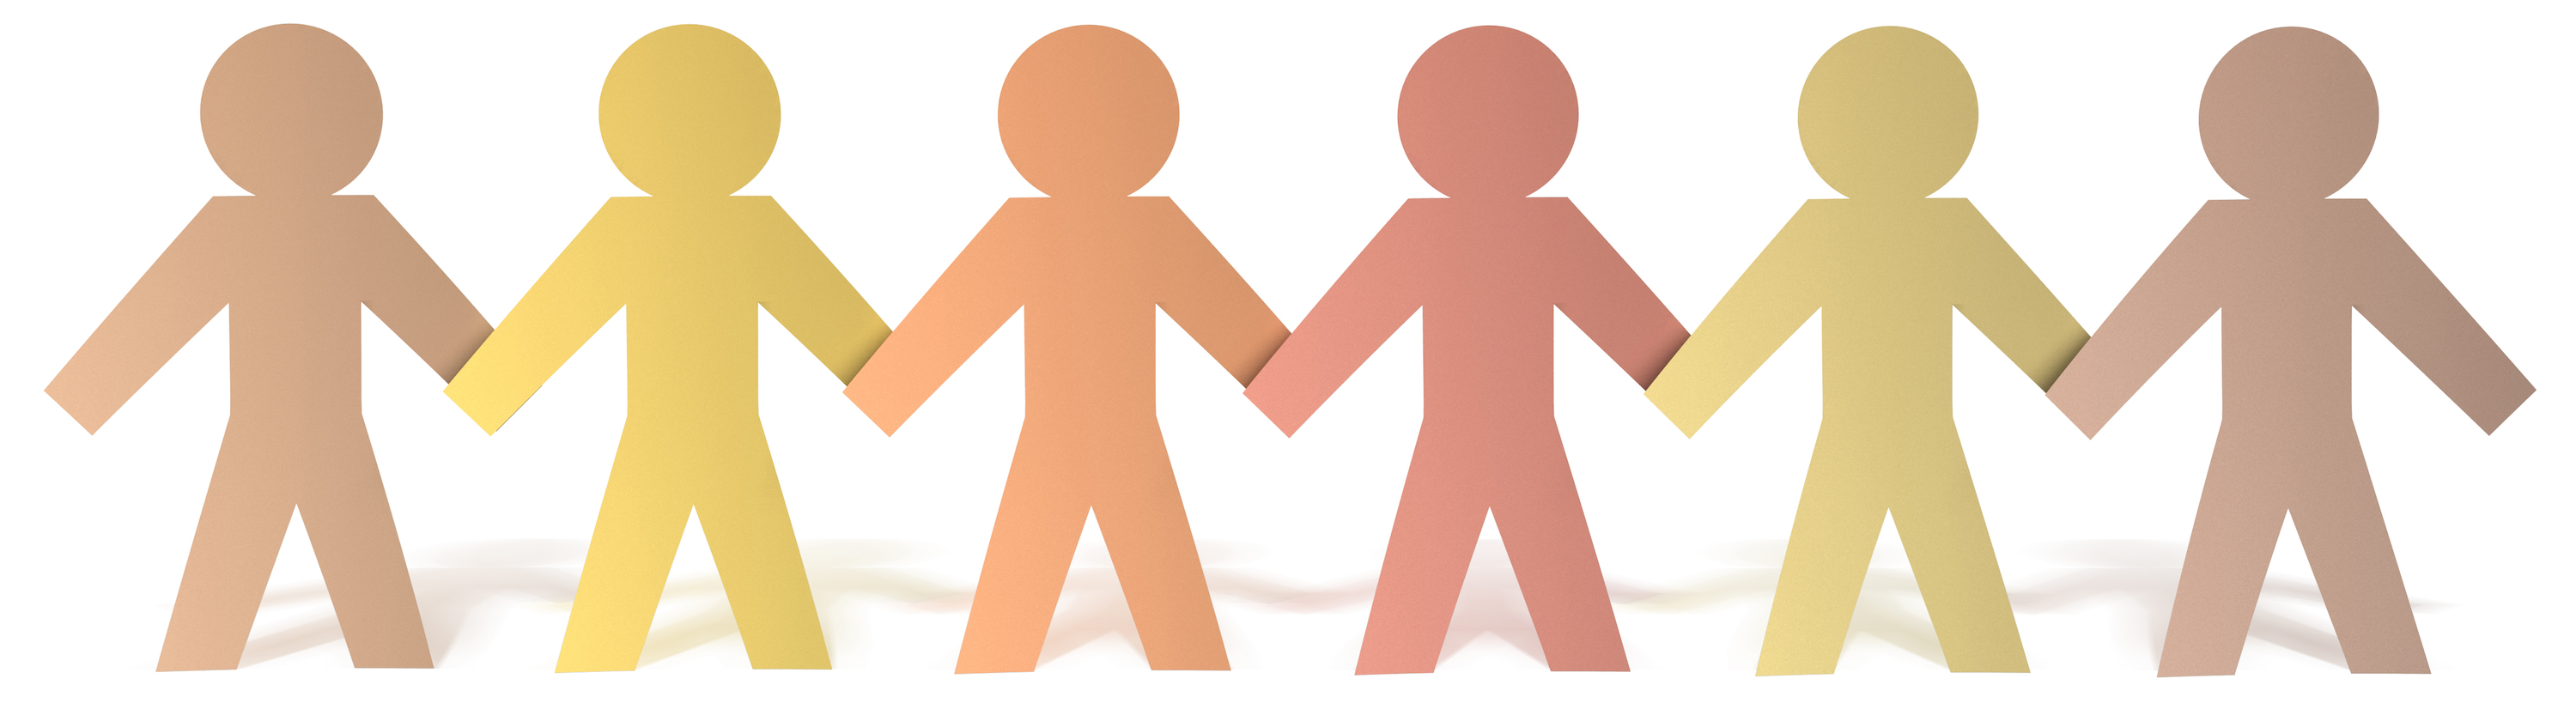 Png Holding Hands - People Holding Hands #2183672, Transparent background PNG HD thumbnail